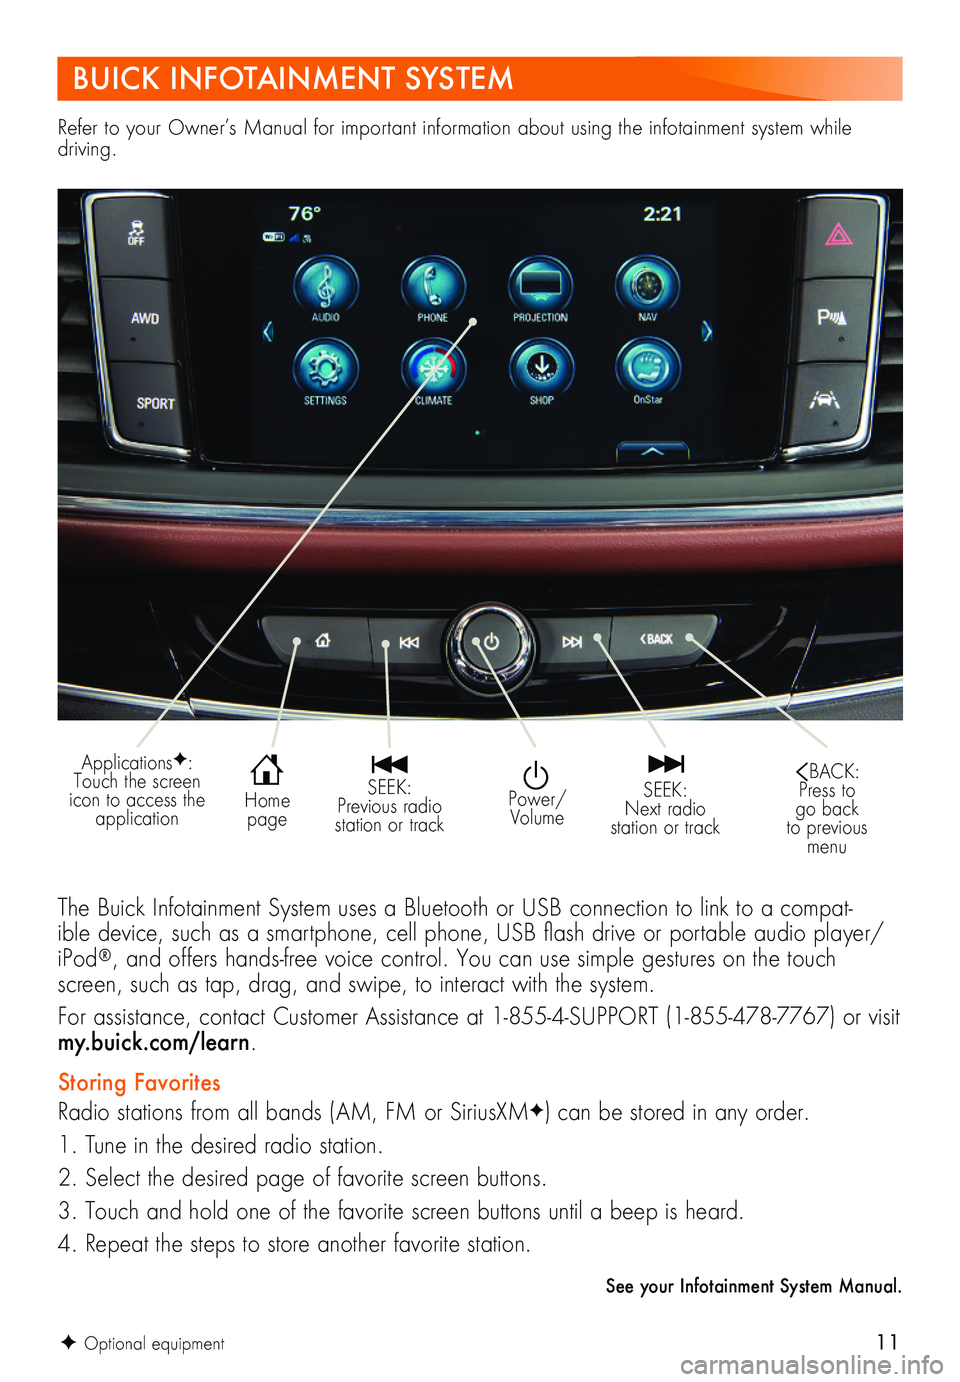 BUICK ENCLAVE 2018  Get To Know Guide 11
Refer to your Owner’s Manual for important information about using the infotainment system while driving.
BUICK INFOTAINMENT SYSTEM
The Buick Infotainment System uses a Bluetooth or USB connectio